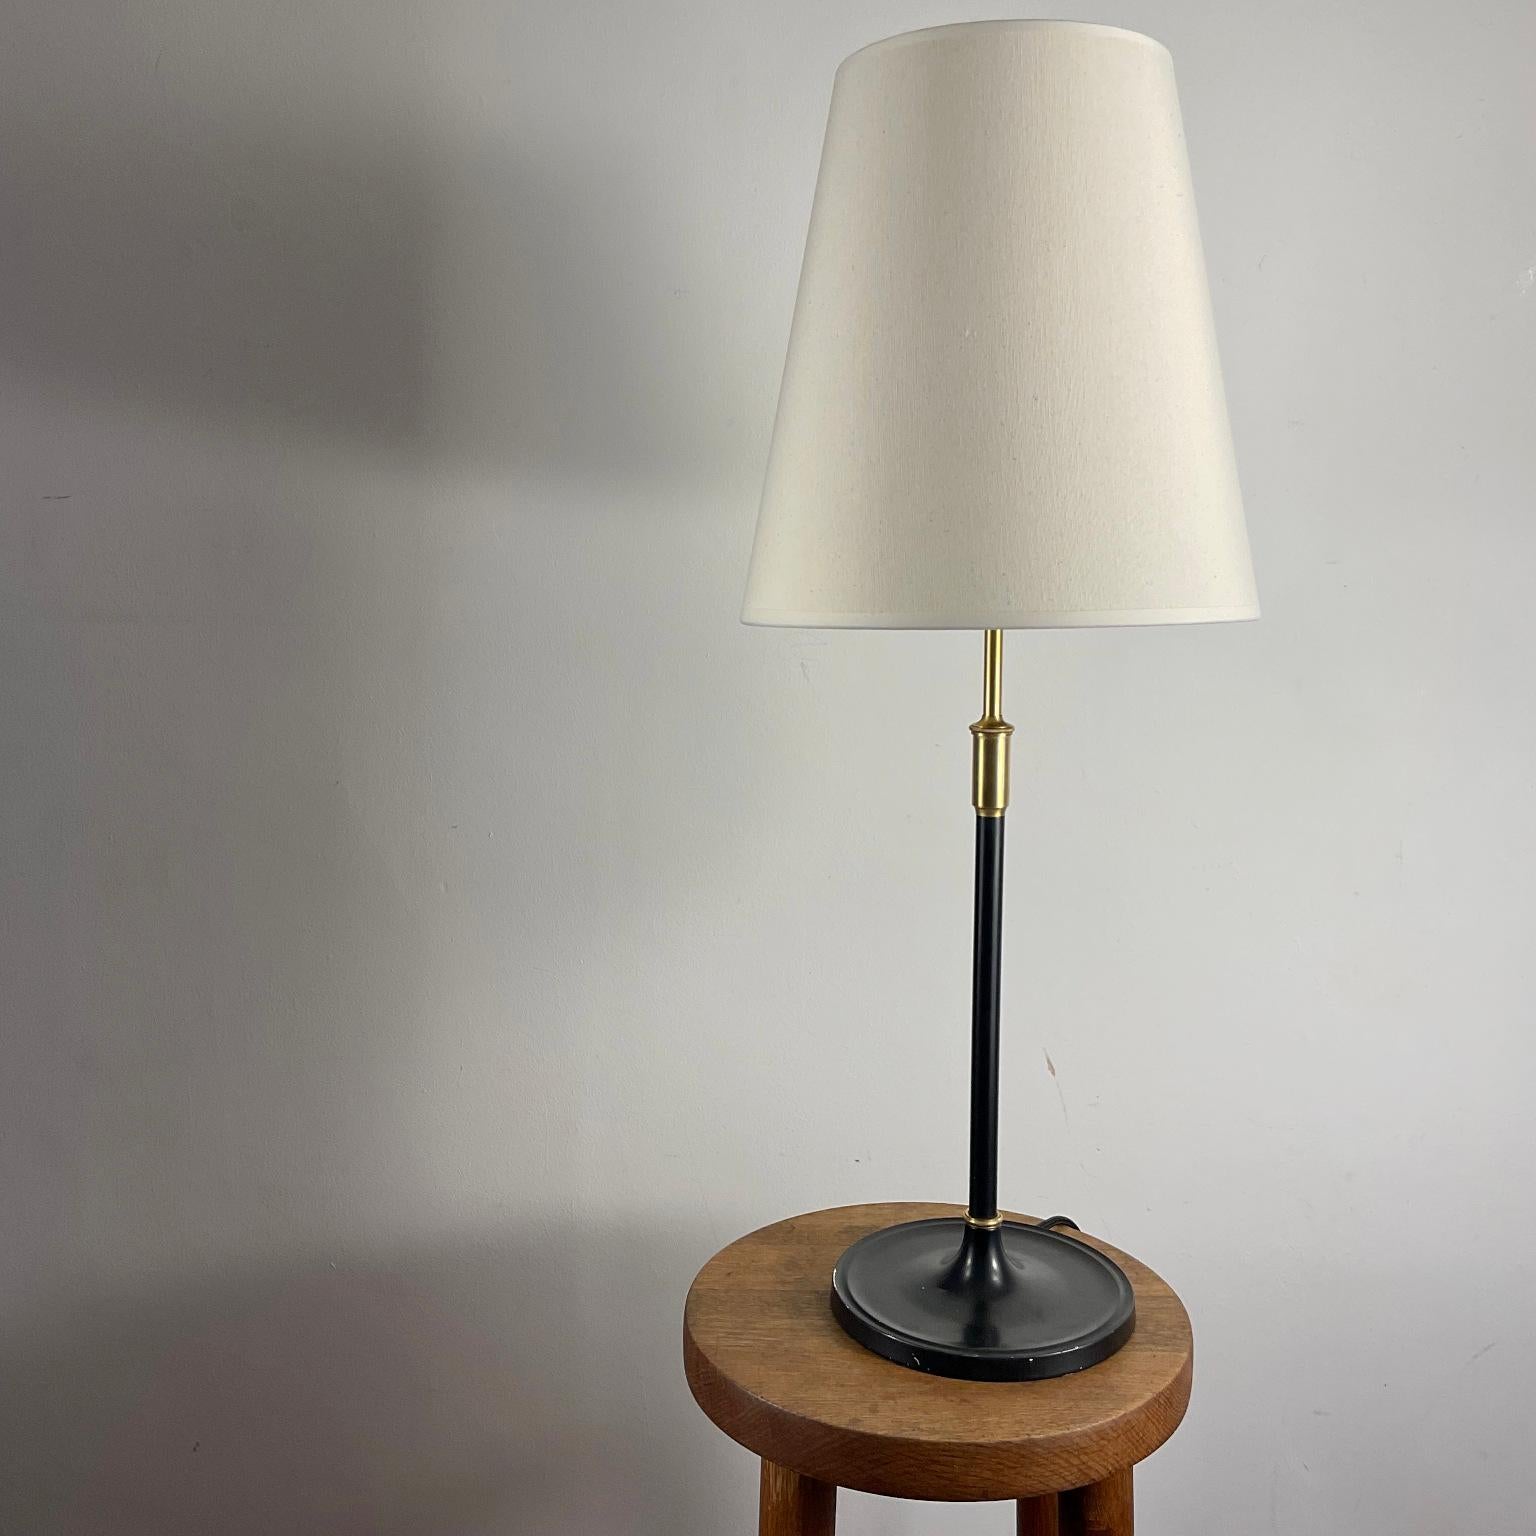 Original model 352 table lamp designed by Aage Petersen for the Danish lighting company 